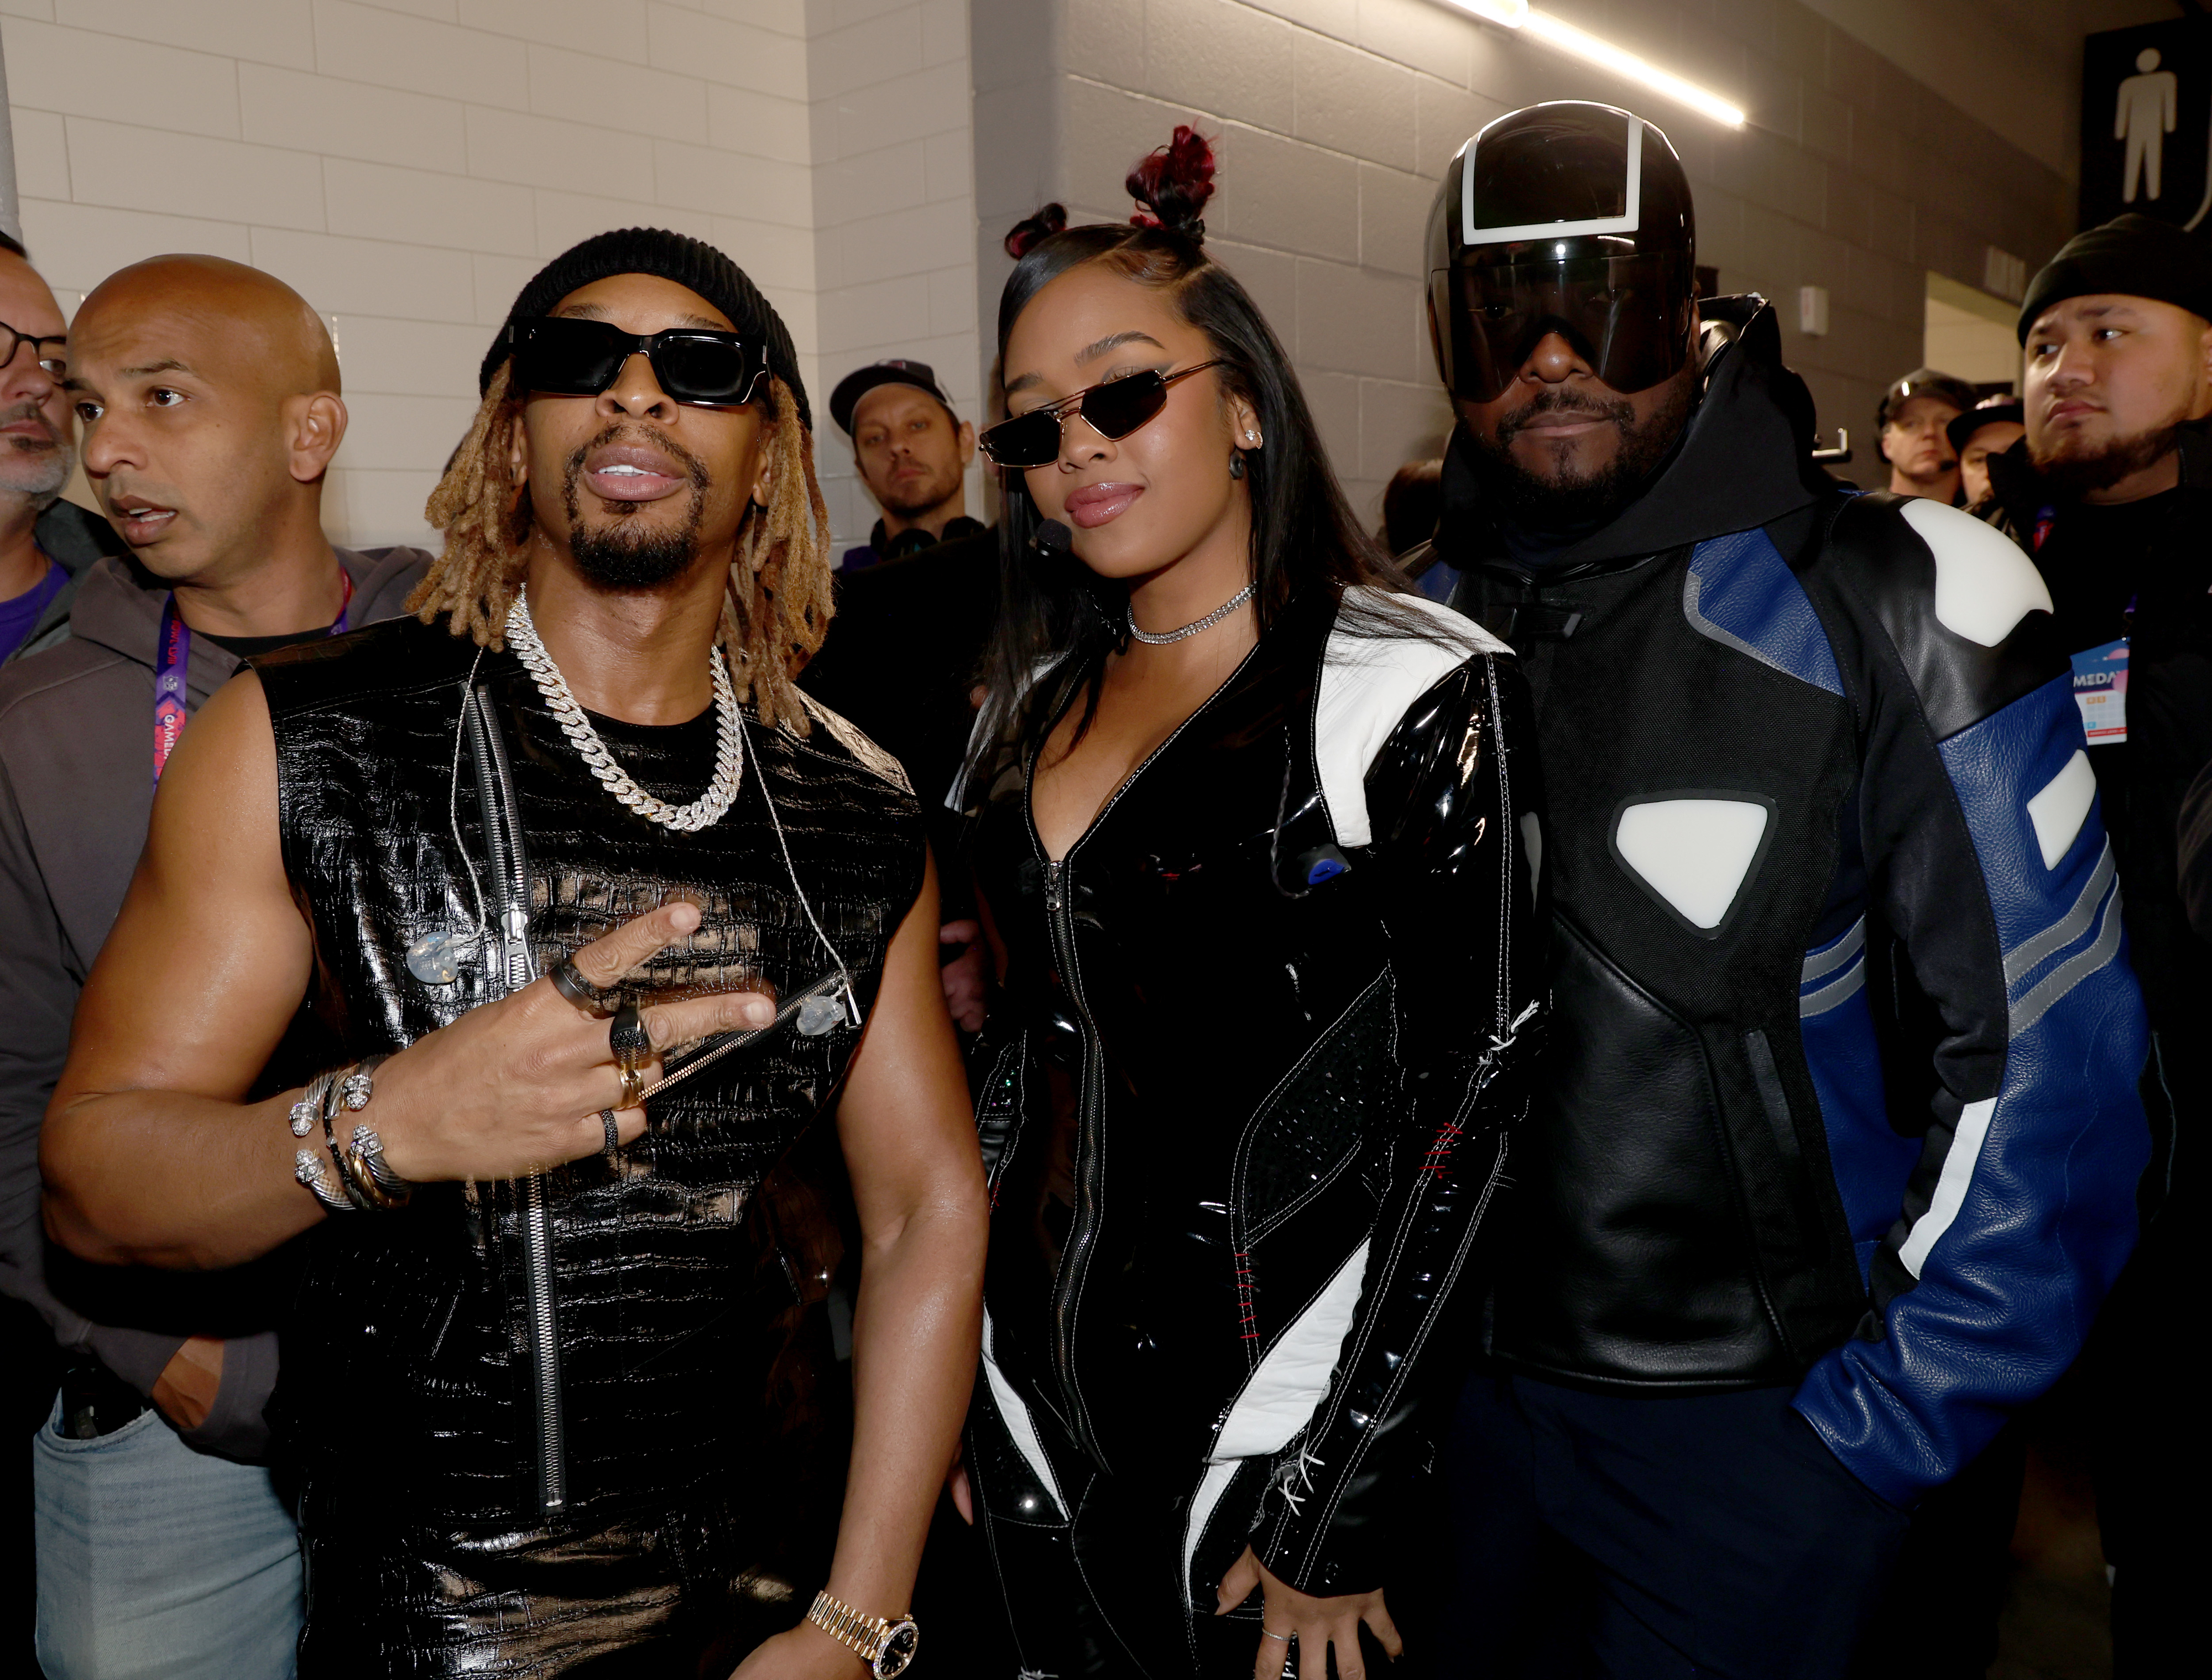 Lil Jon, H.E.R., and will.i.am